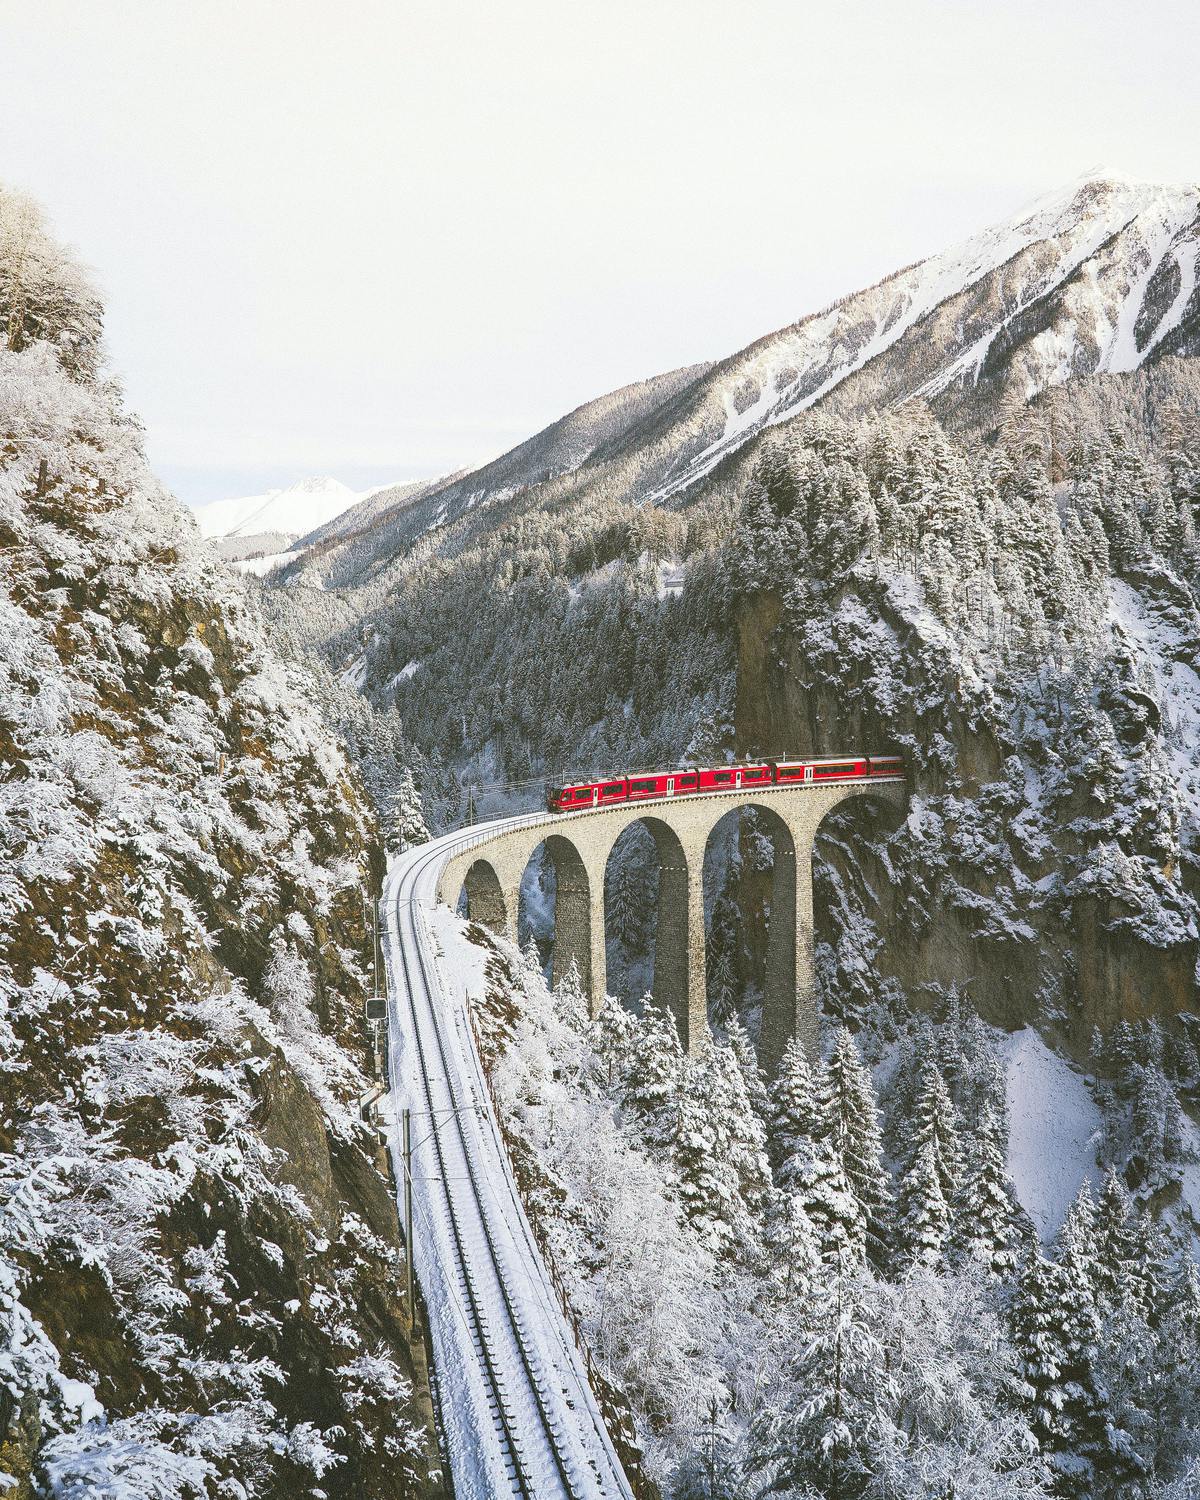 A train on a bridge in the snowy mountains